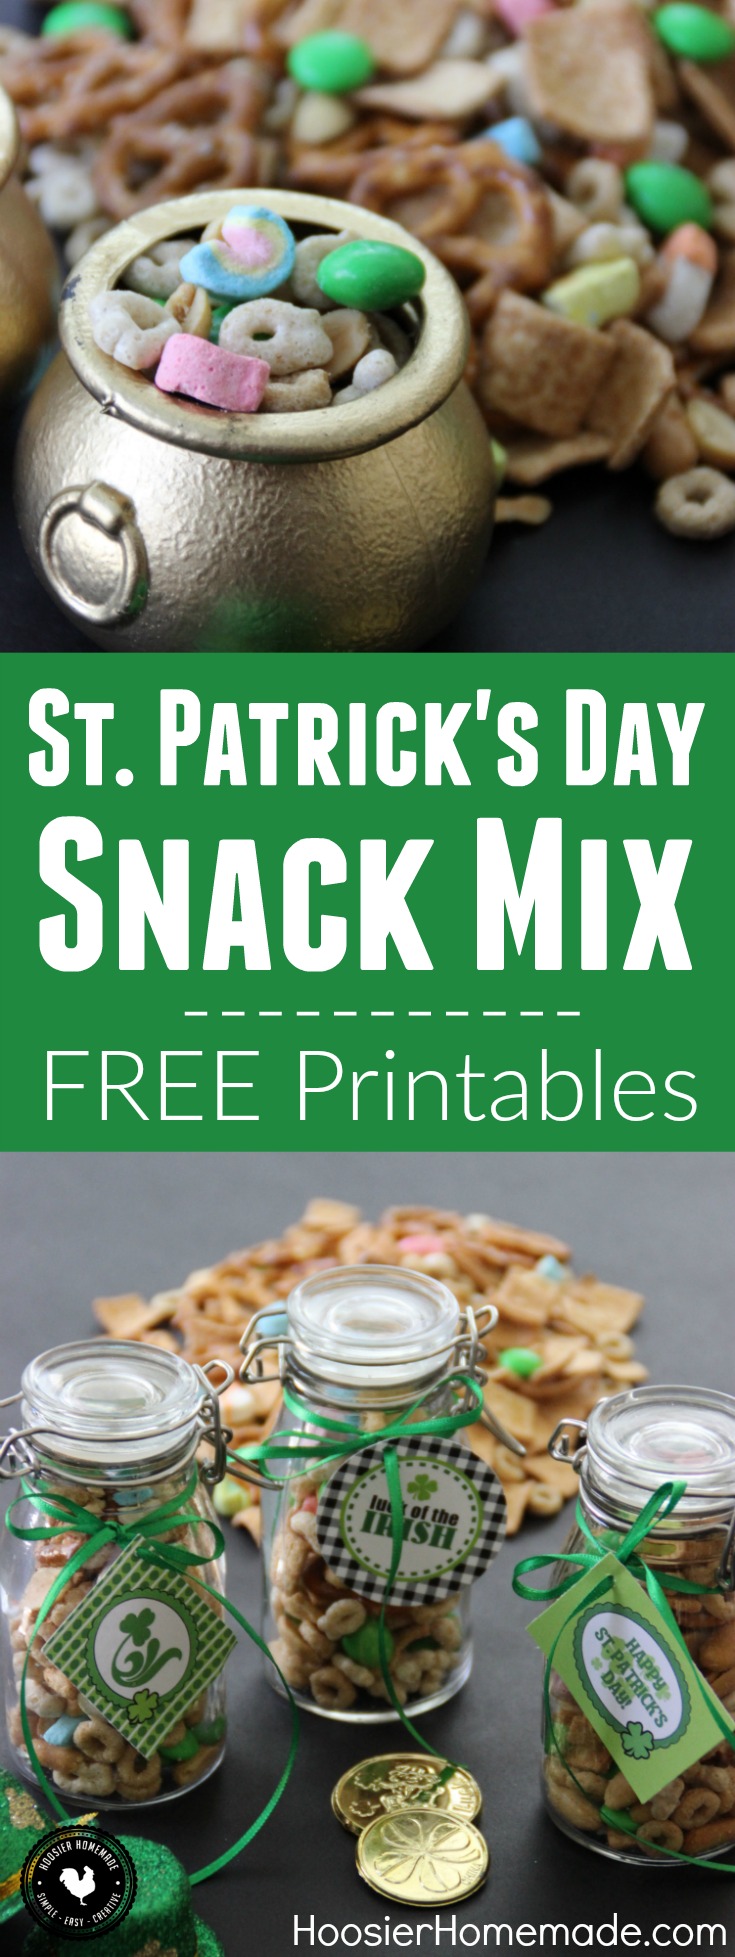 This Snack Mix for St. Patrick's Day makes the perfect little gift! Add a FREE St. Patrick's Day Printable Tag! Simple ingredients for this fun snack that kids of all ages will love!